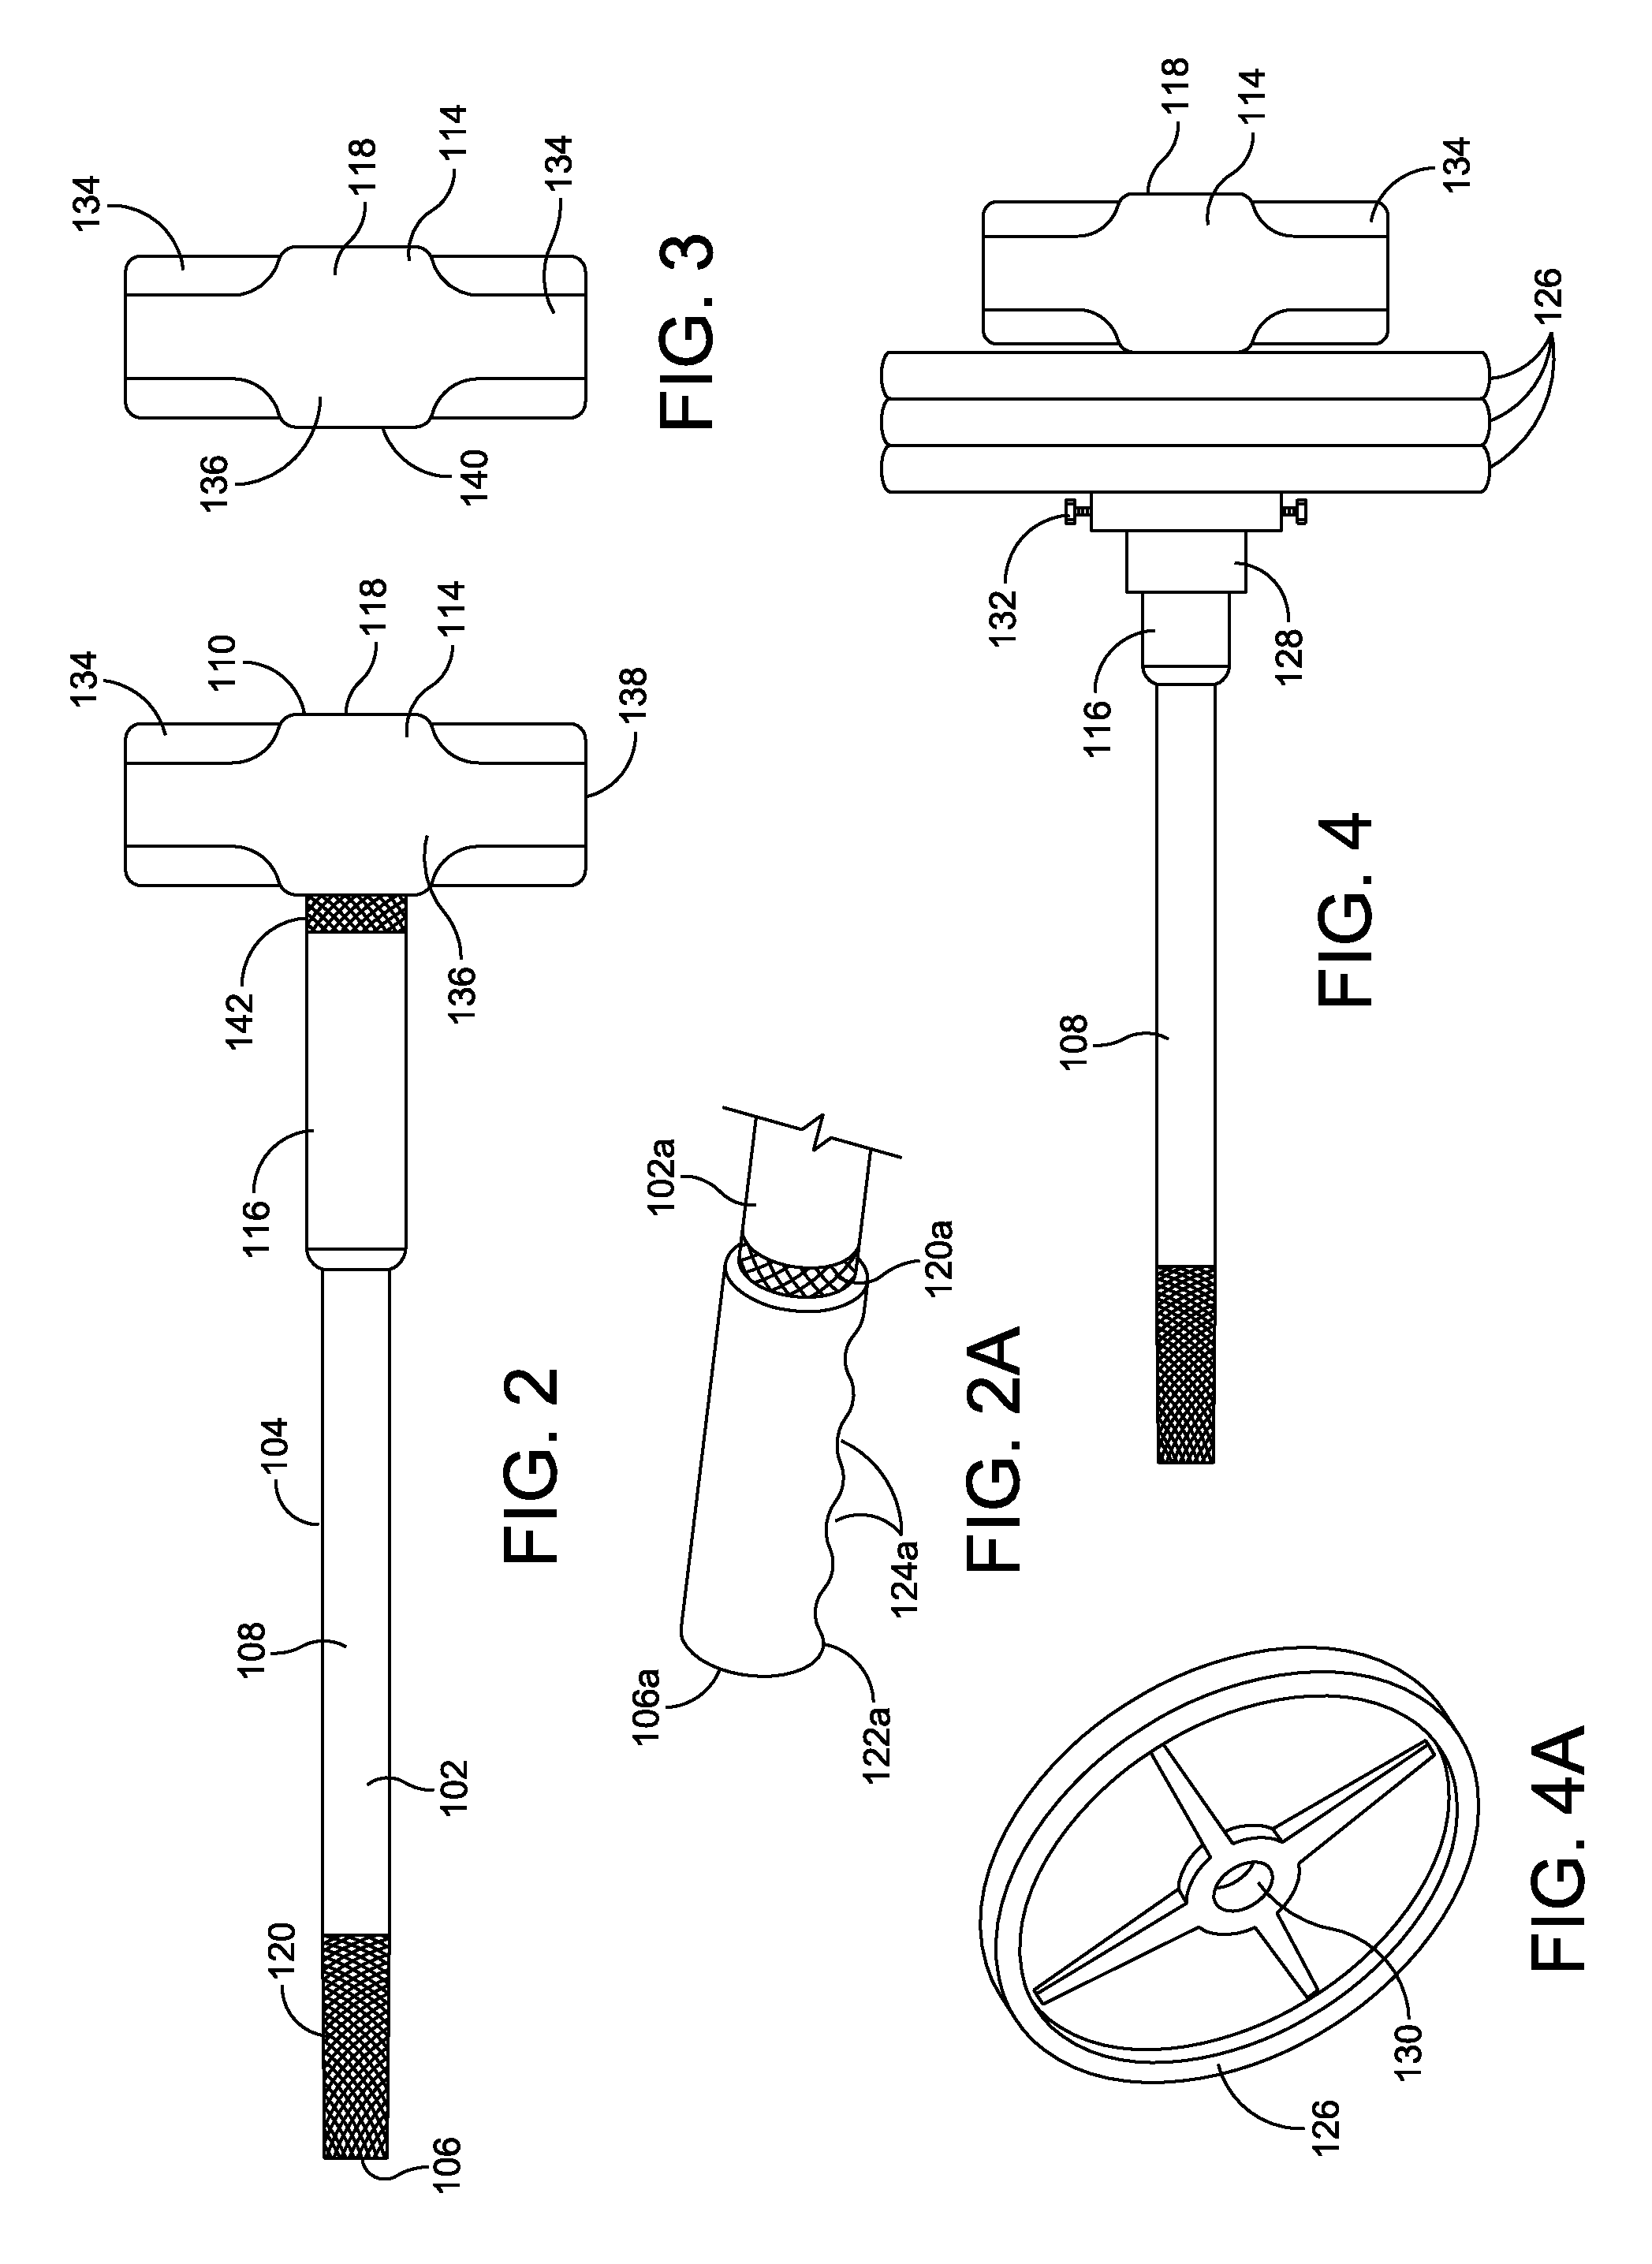 Variable weight hammer useful as exercise apparatus